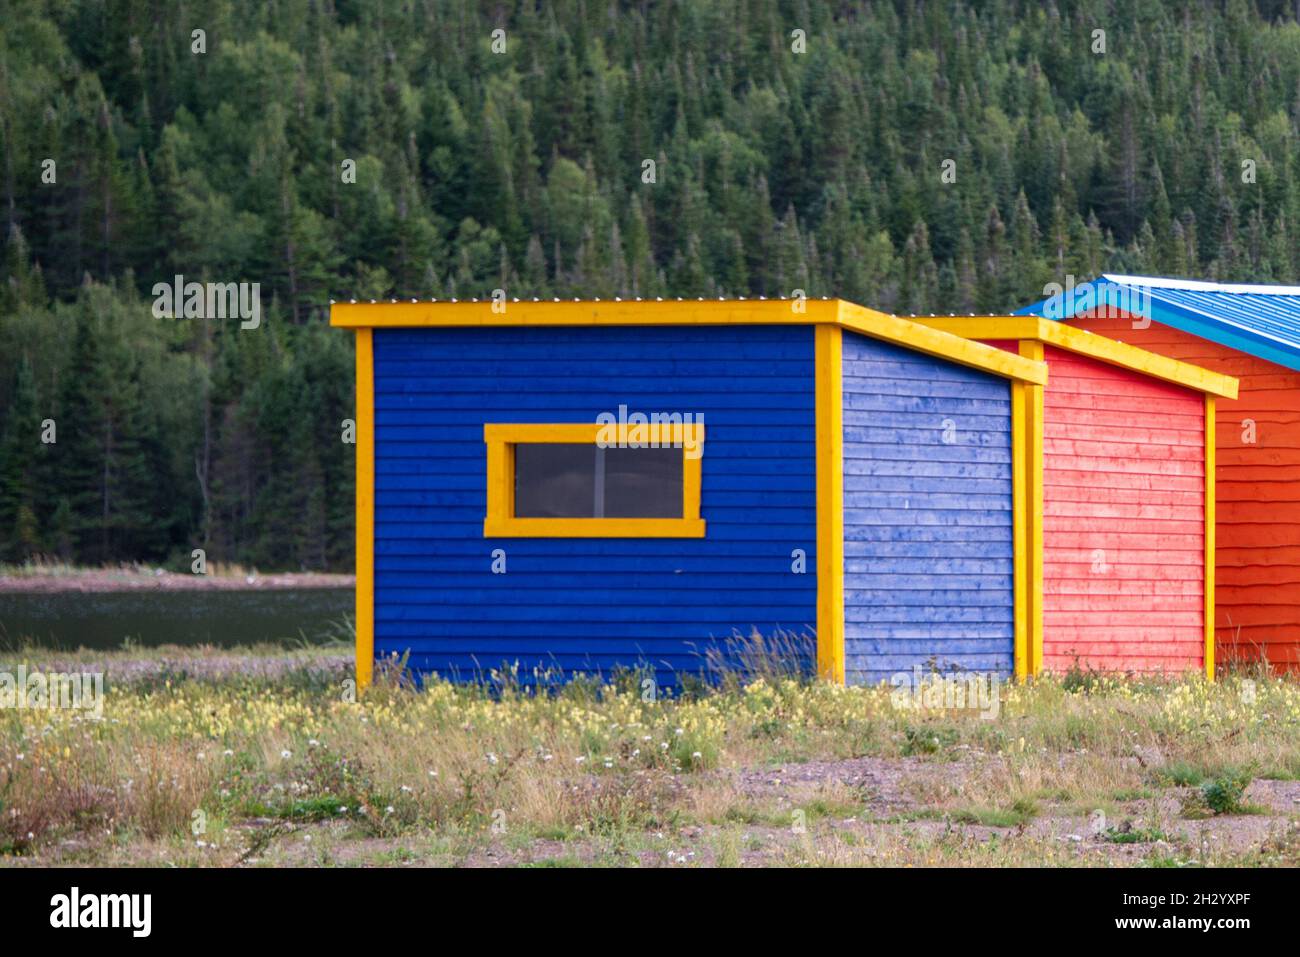 Multiple colorful sheds or storage buildings in a field with trees. One is blue and the others are red. All storage units have a bright yellow trim. Stock Photo